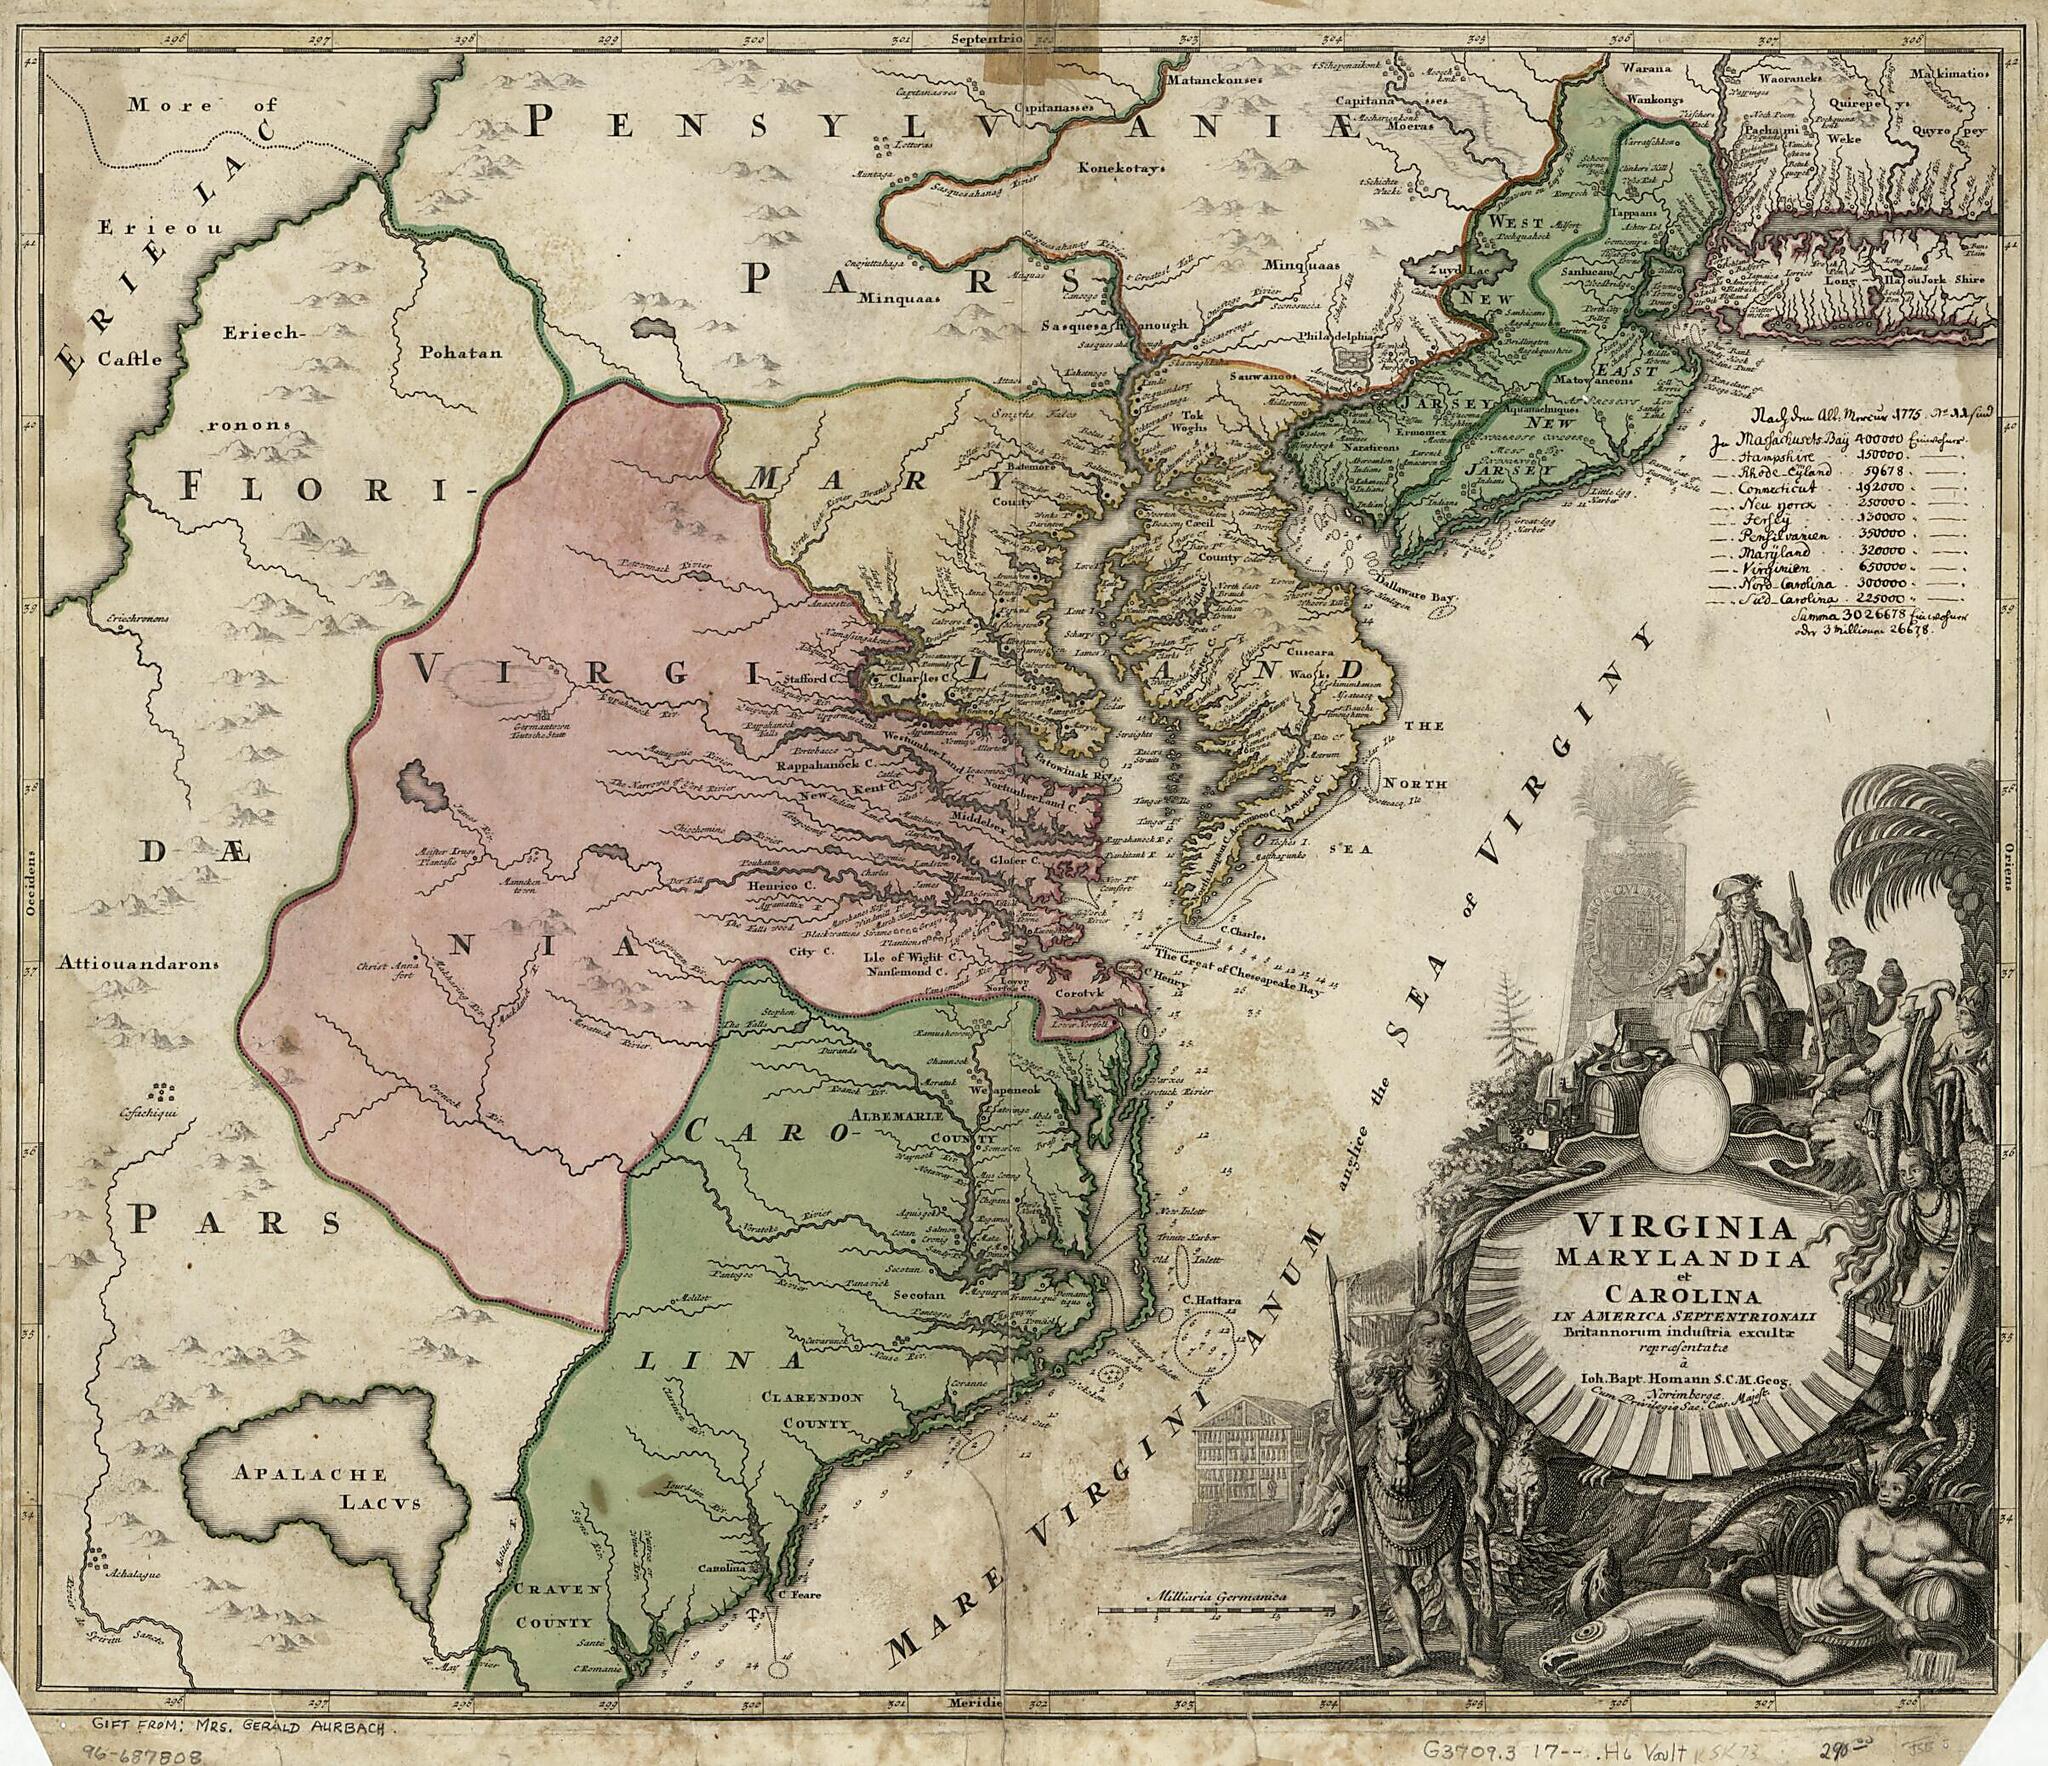 This old map of Virginia, Marylandia Et Carolina In America Septentrionali Brittannorum Industria Excultæ from 1700 was created by Johann Baptist Homann in 1700